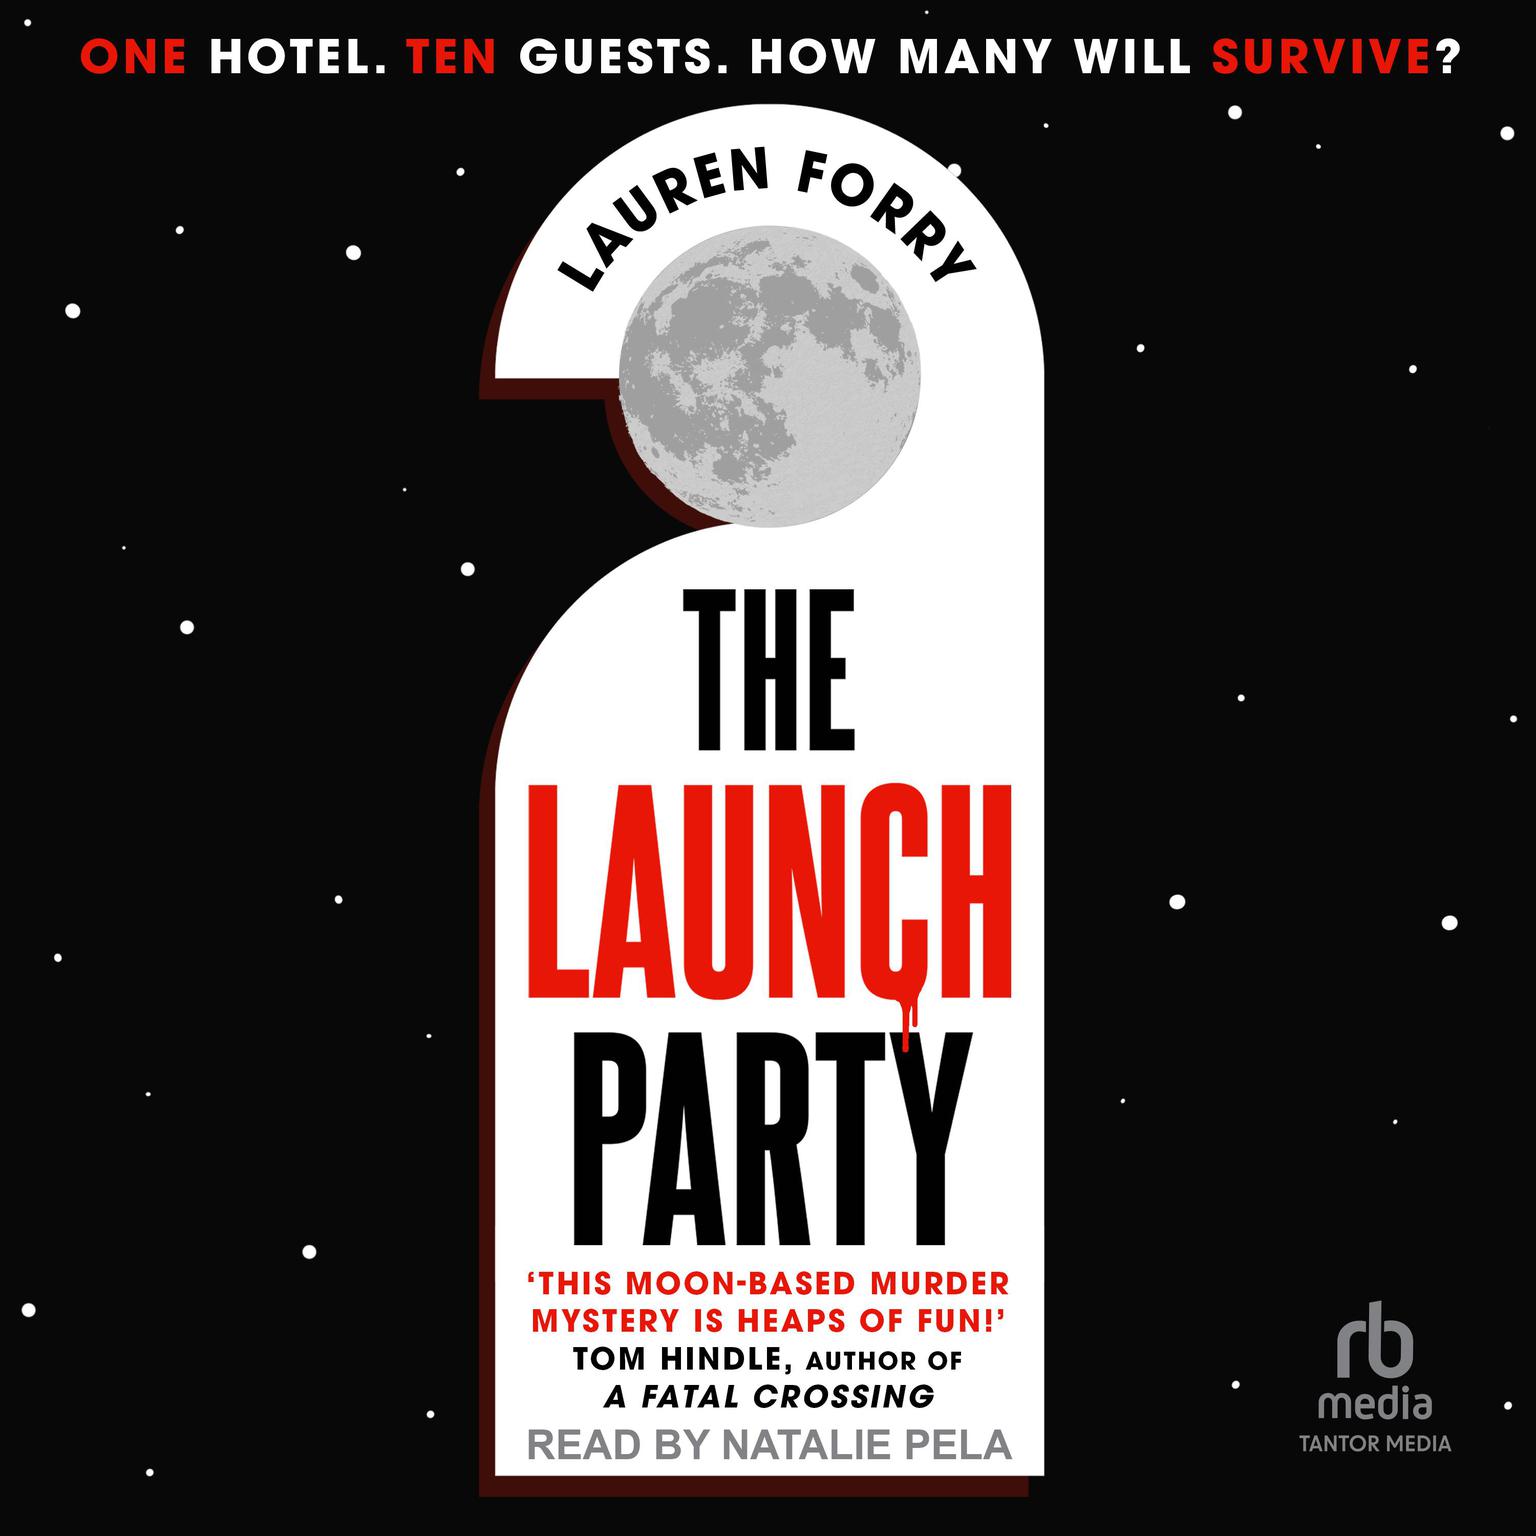 The Launch Party Audiobook, by Lauren Forry